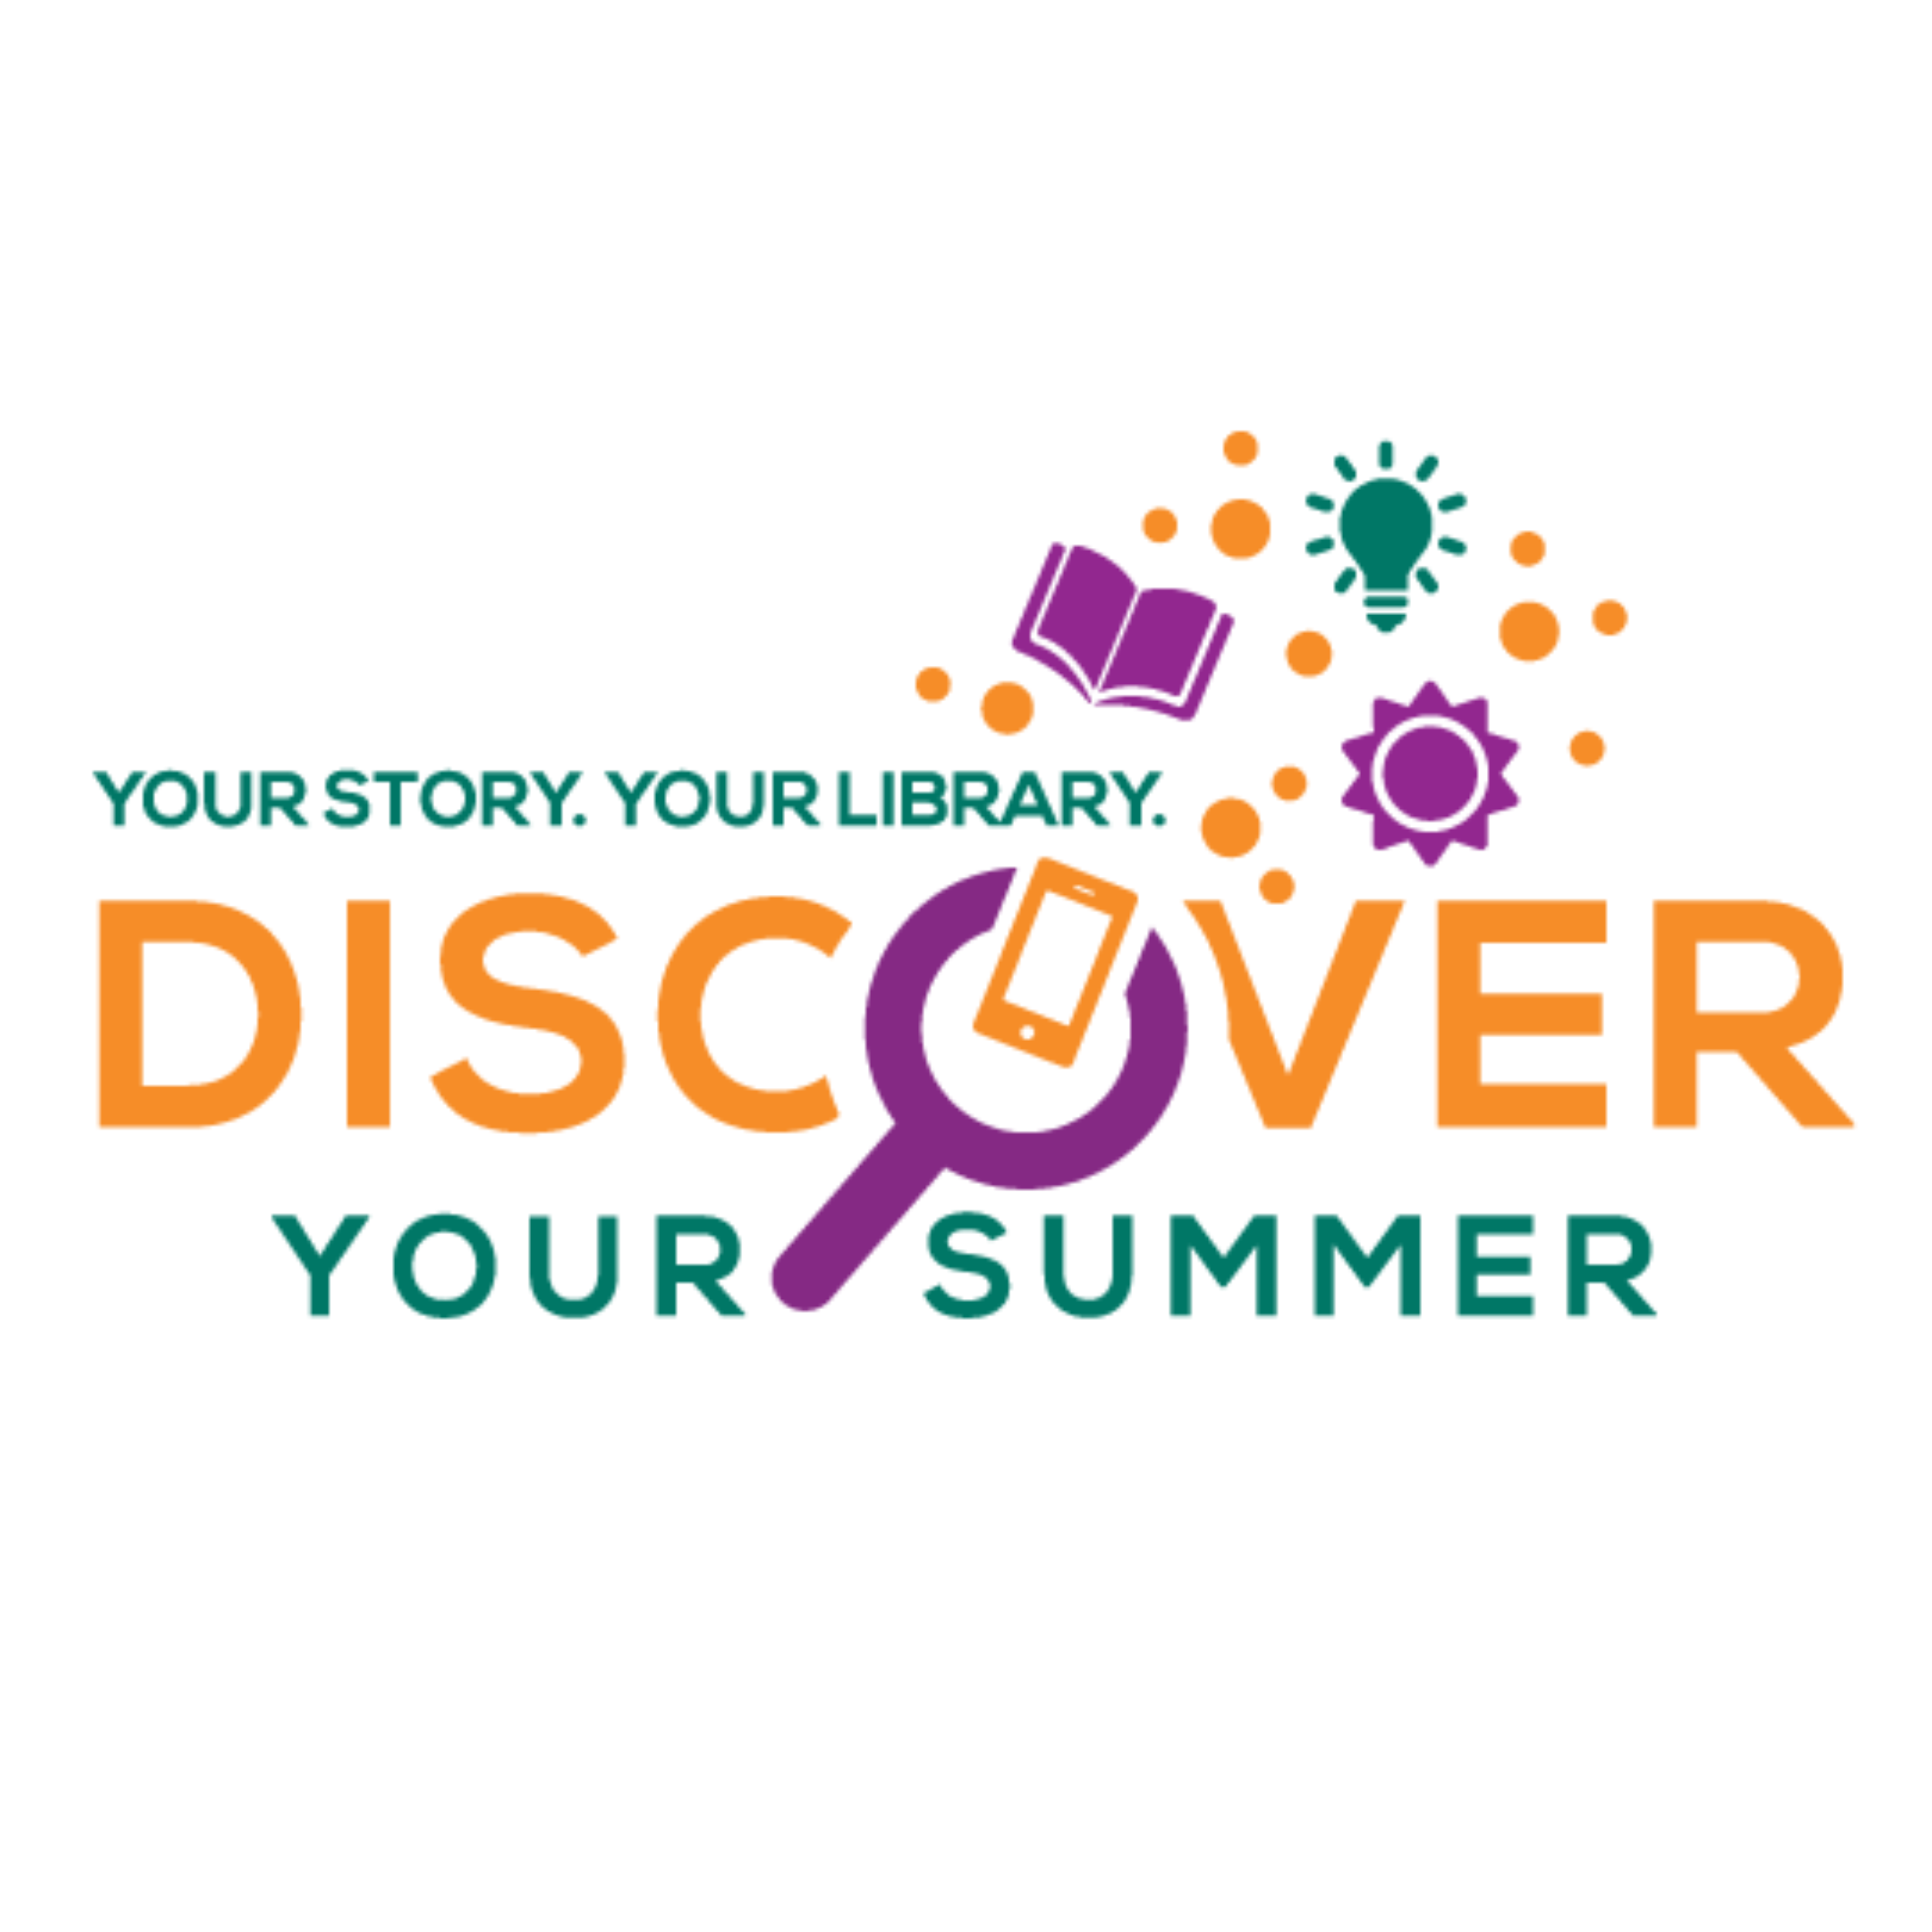 Your Story. Your Library. Discover Your Summer!